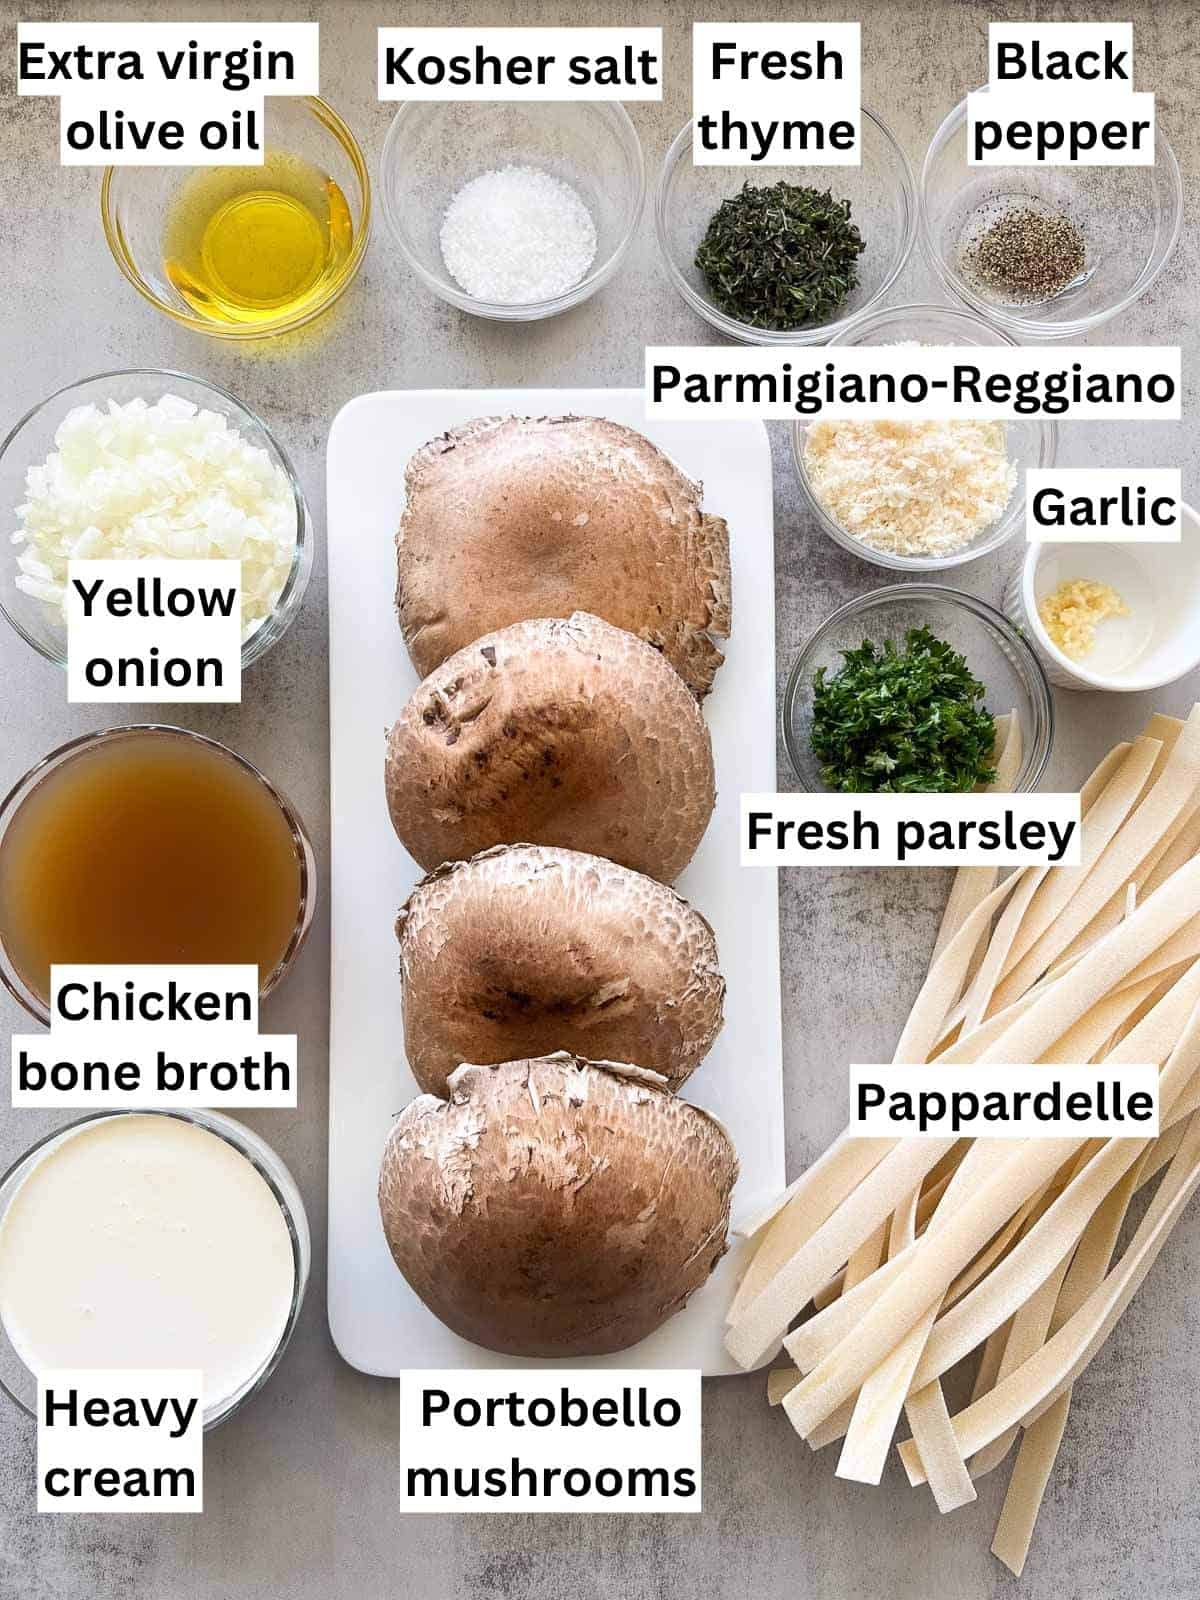 The ingredients to make mushroom pappardelle.